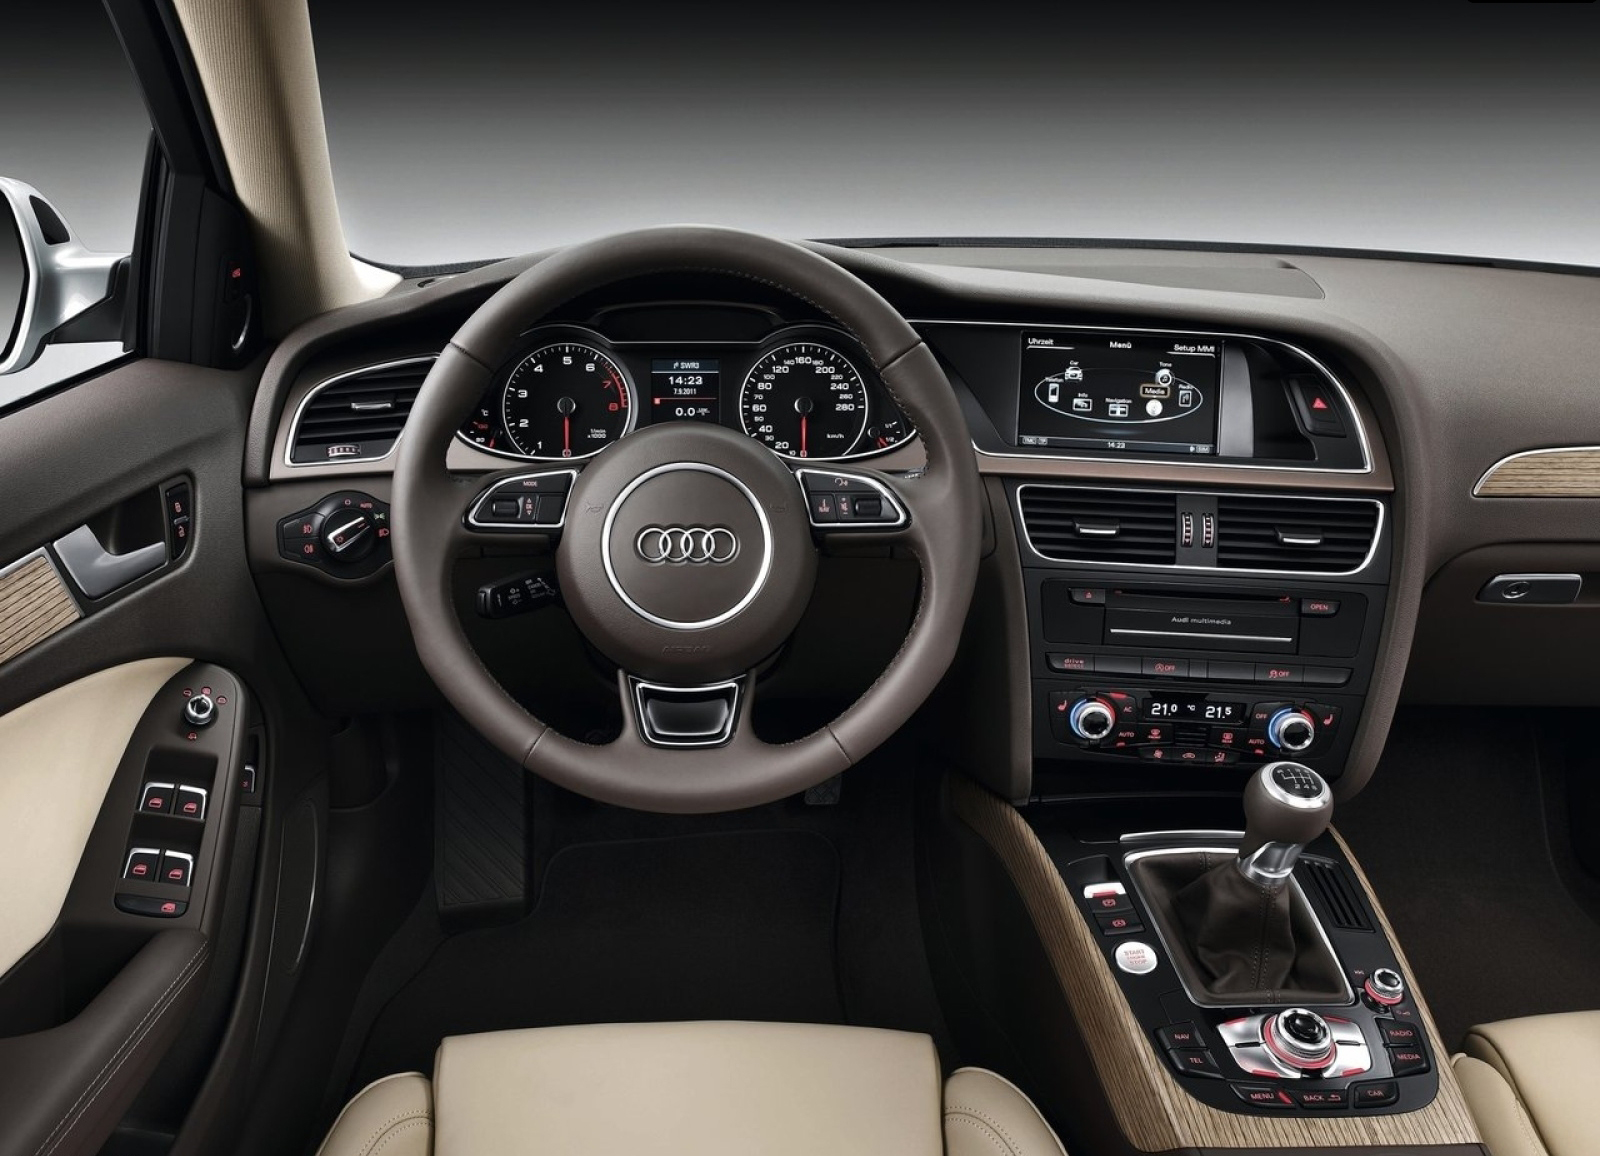 The World of Audi - Audi Forum | News | Prices | Technical ...